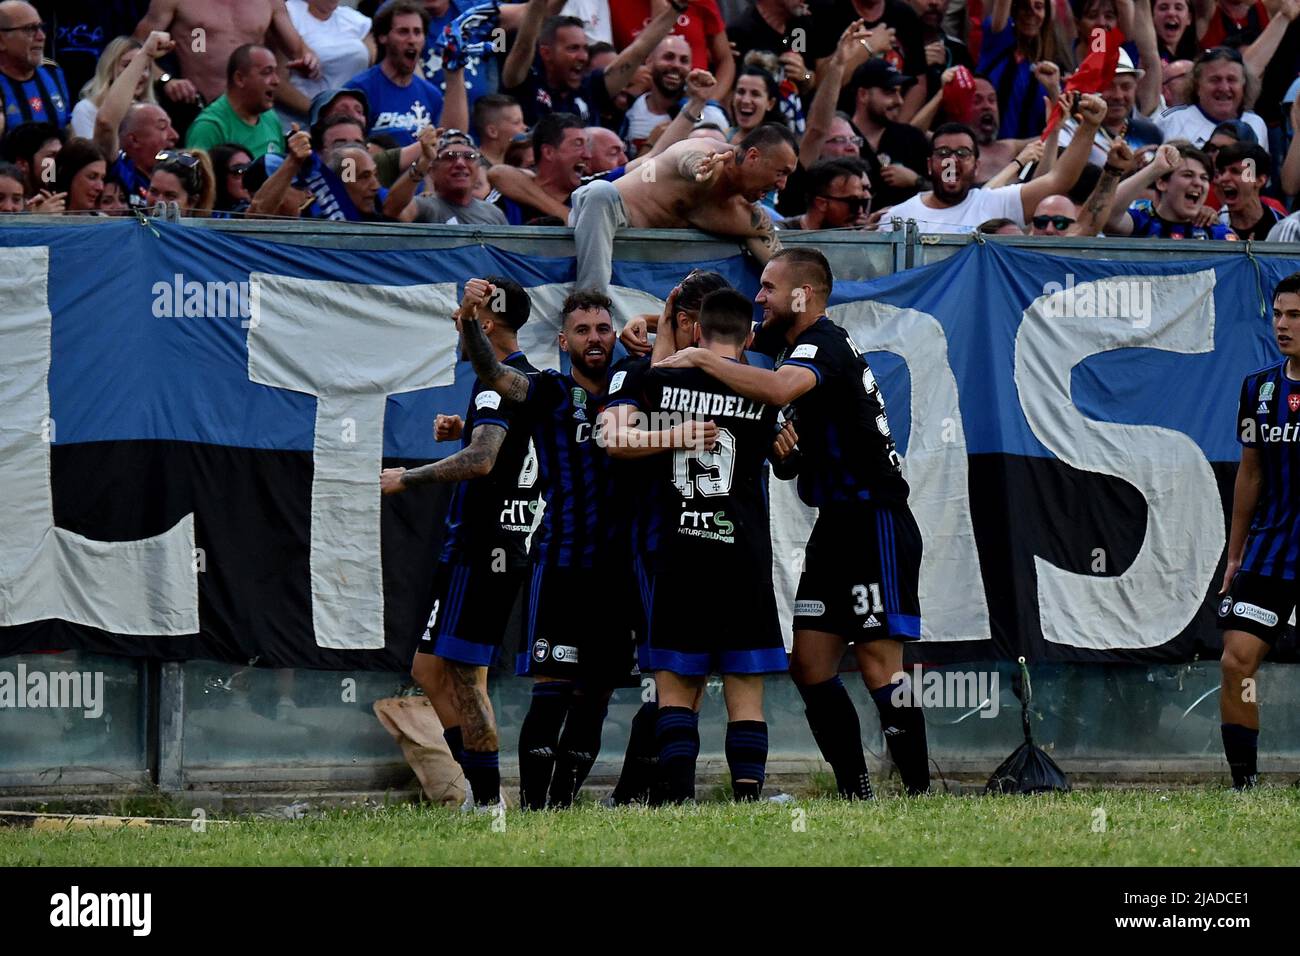 Serie B: Monza to face Pisa in promotion play-off final - Football